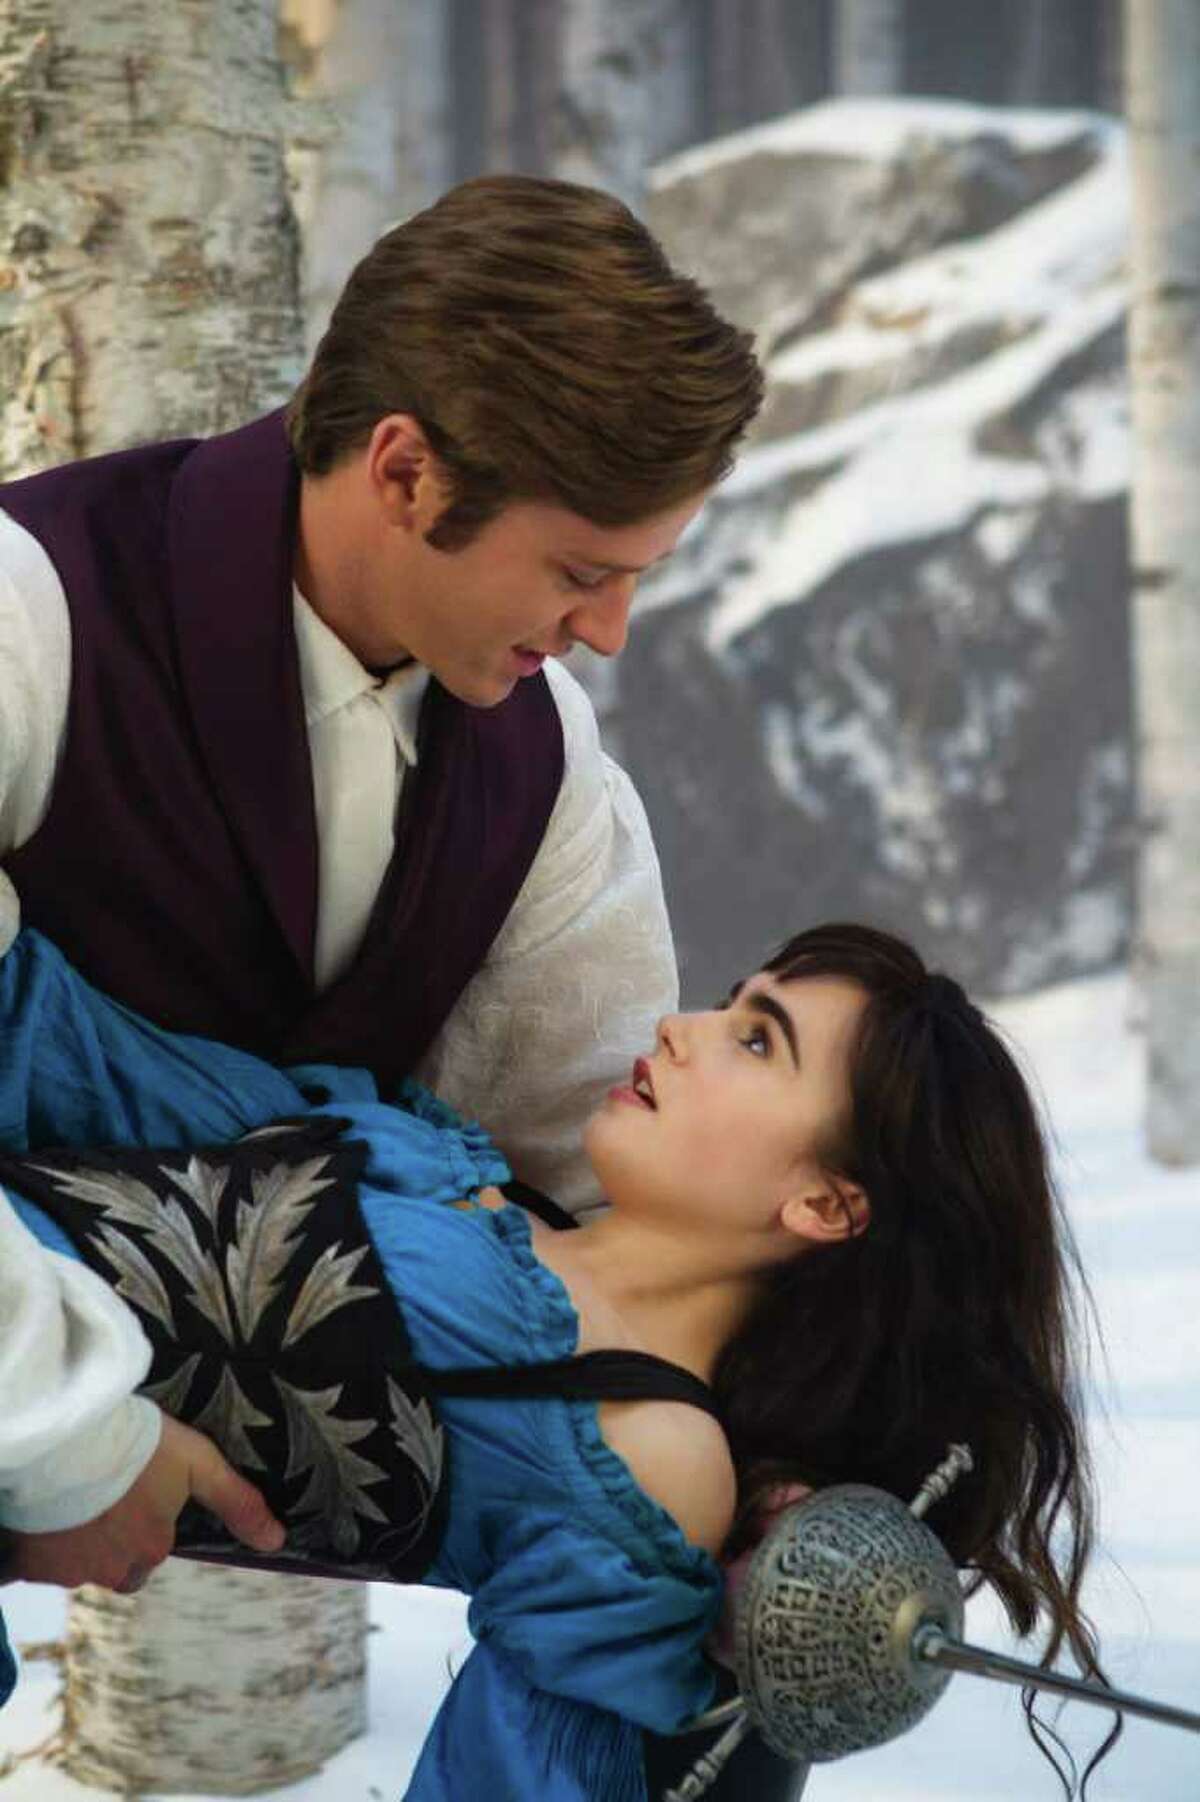 In this film image released by Relativity Media, Armie Hammer and Lily Collins are shown in a scene from, "Mirror Mirror."